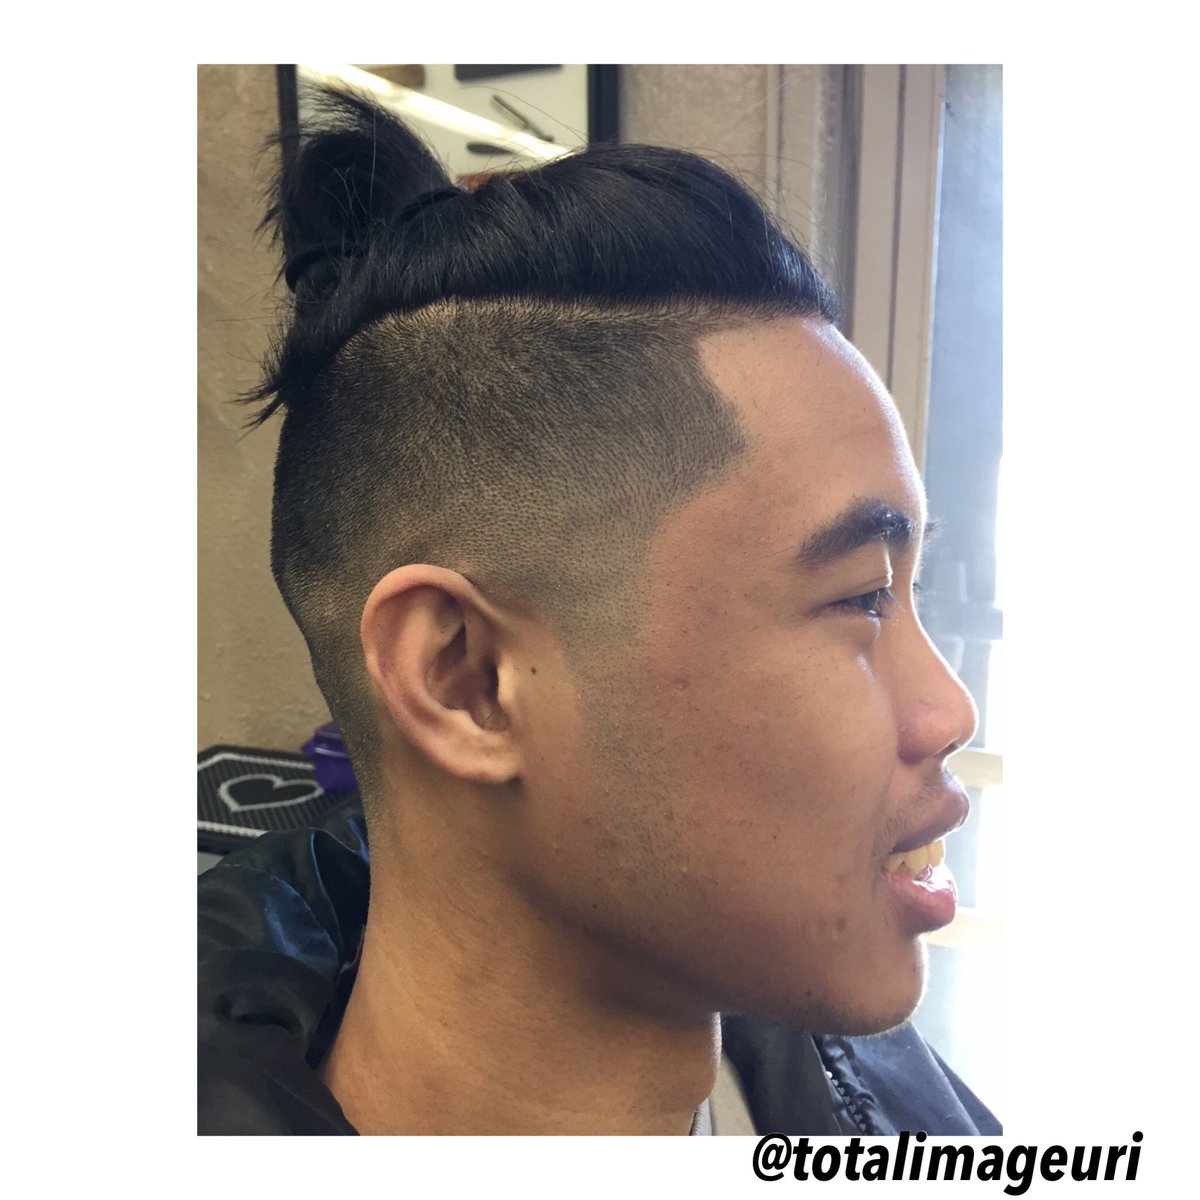 total image uri on twitter: "bald fade undercut with a ton